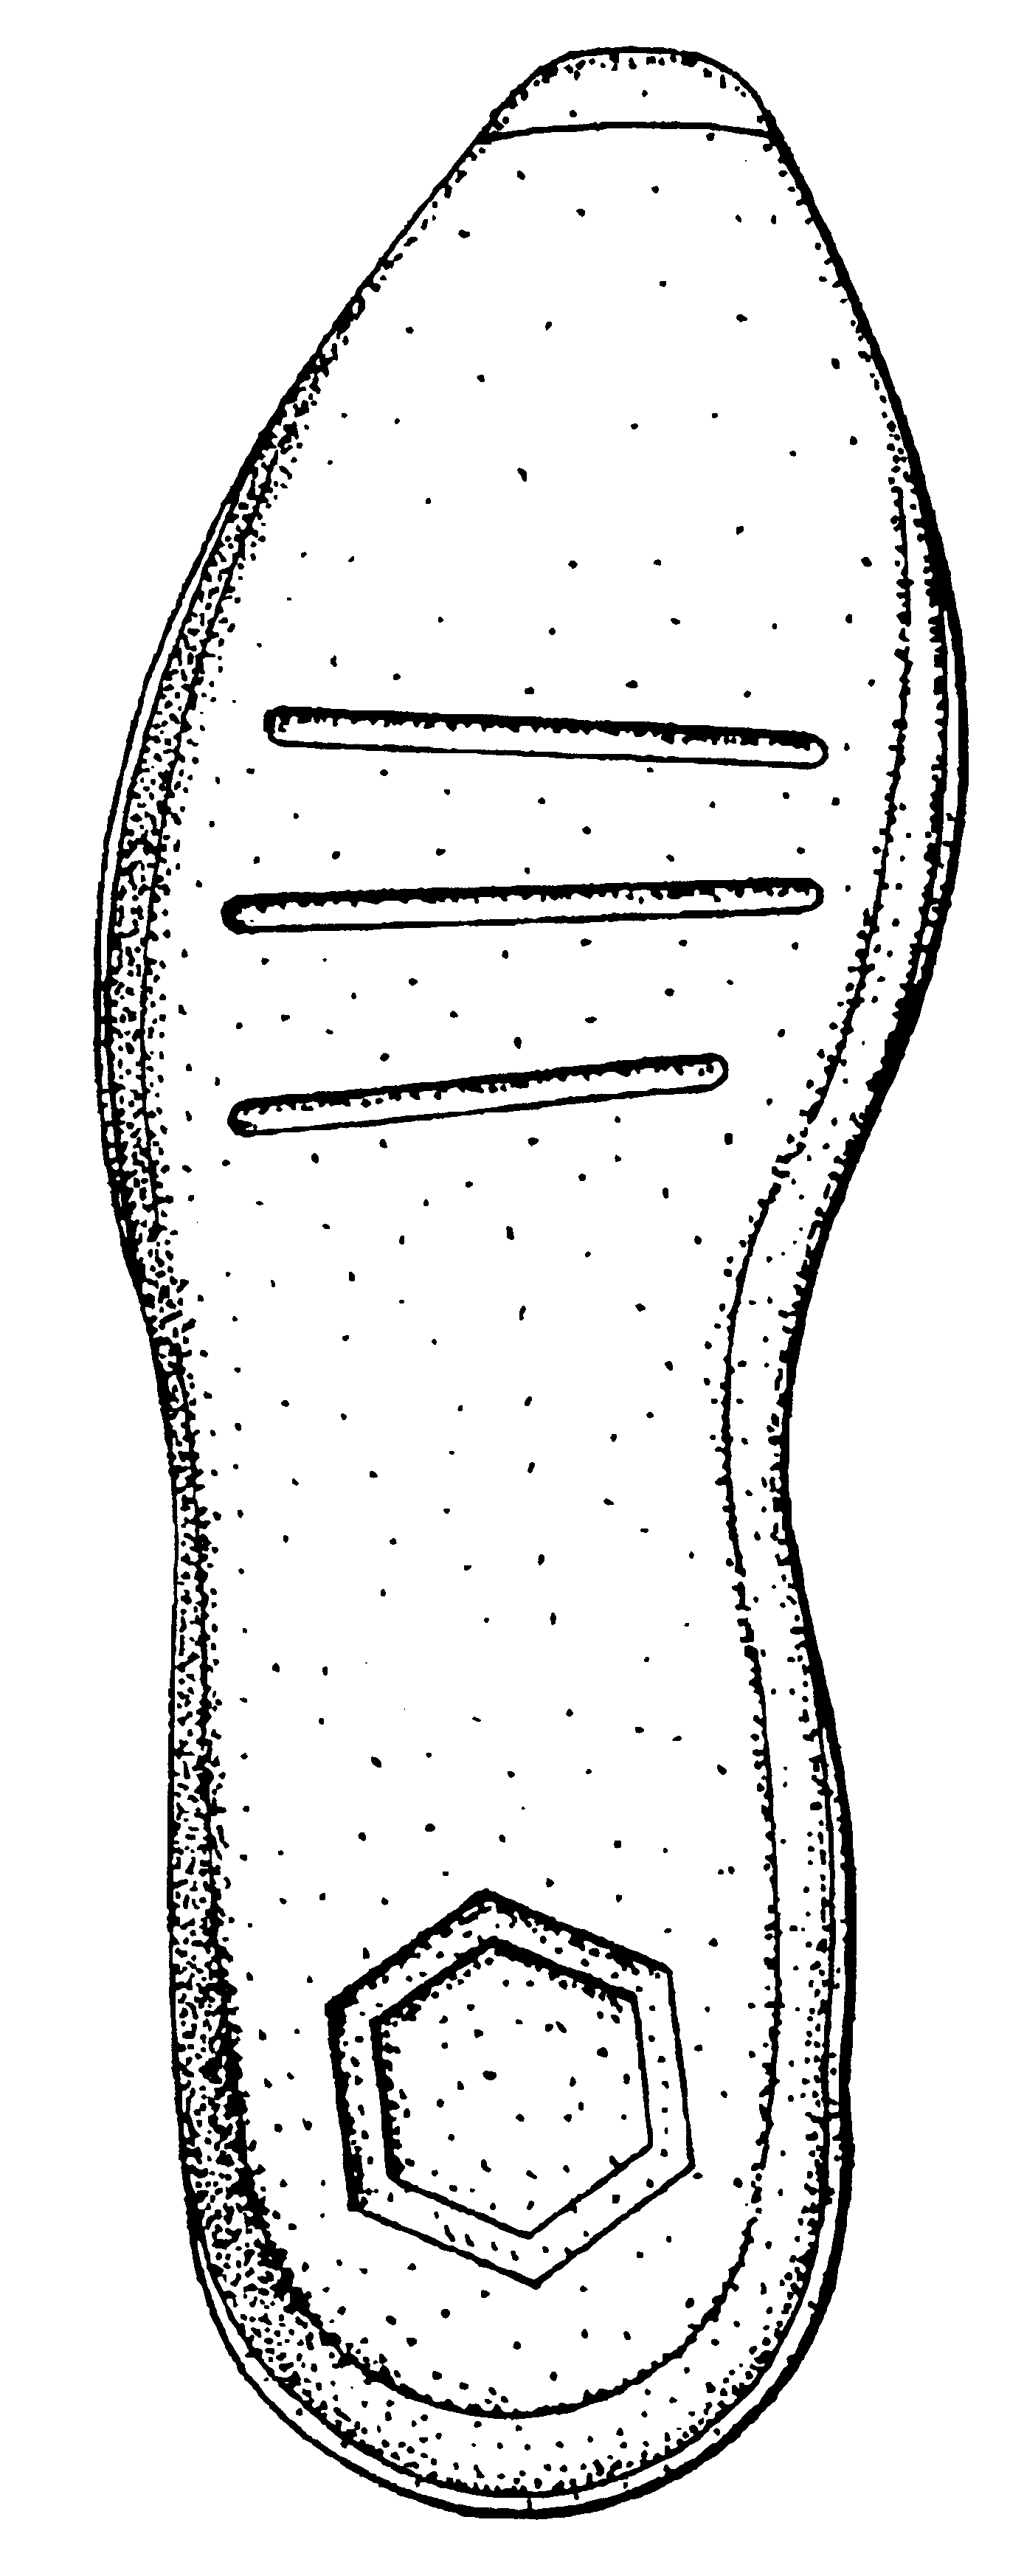 A typical example of  a sole with a hexagonal element.
